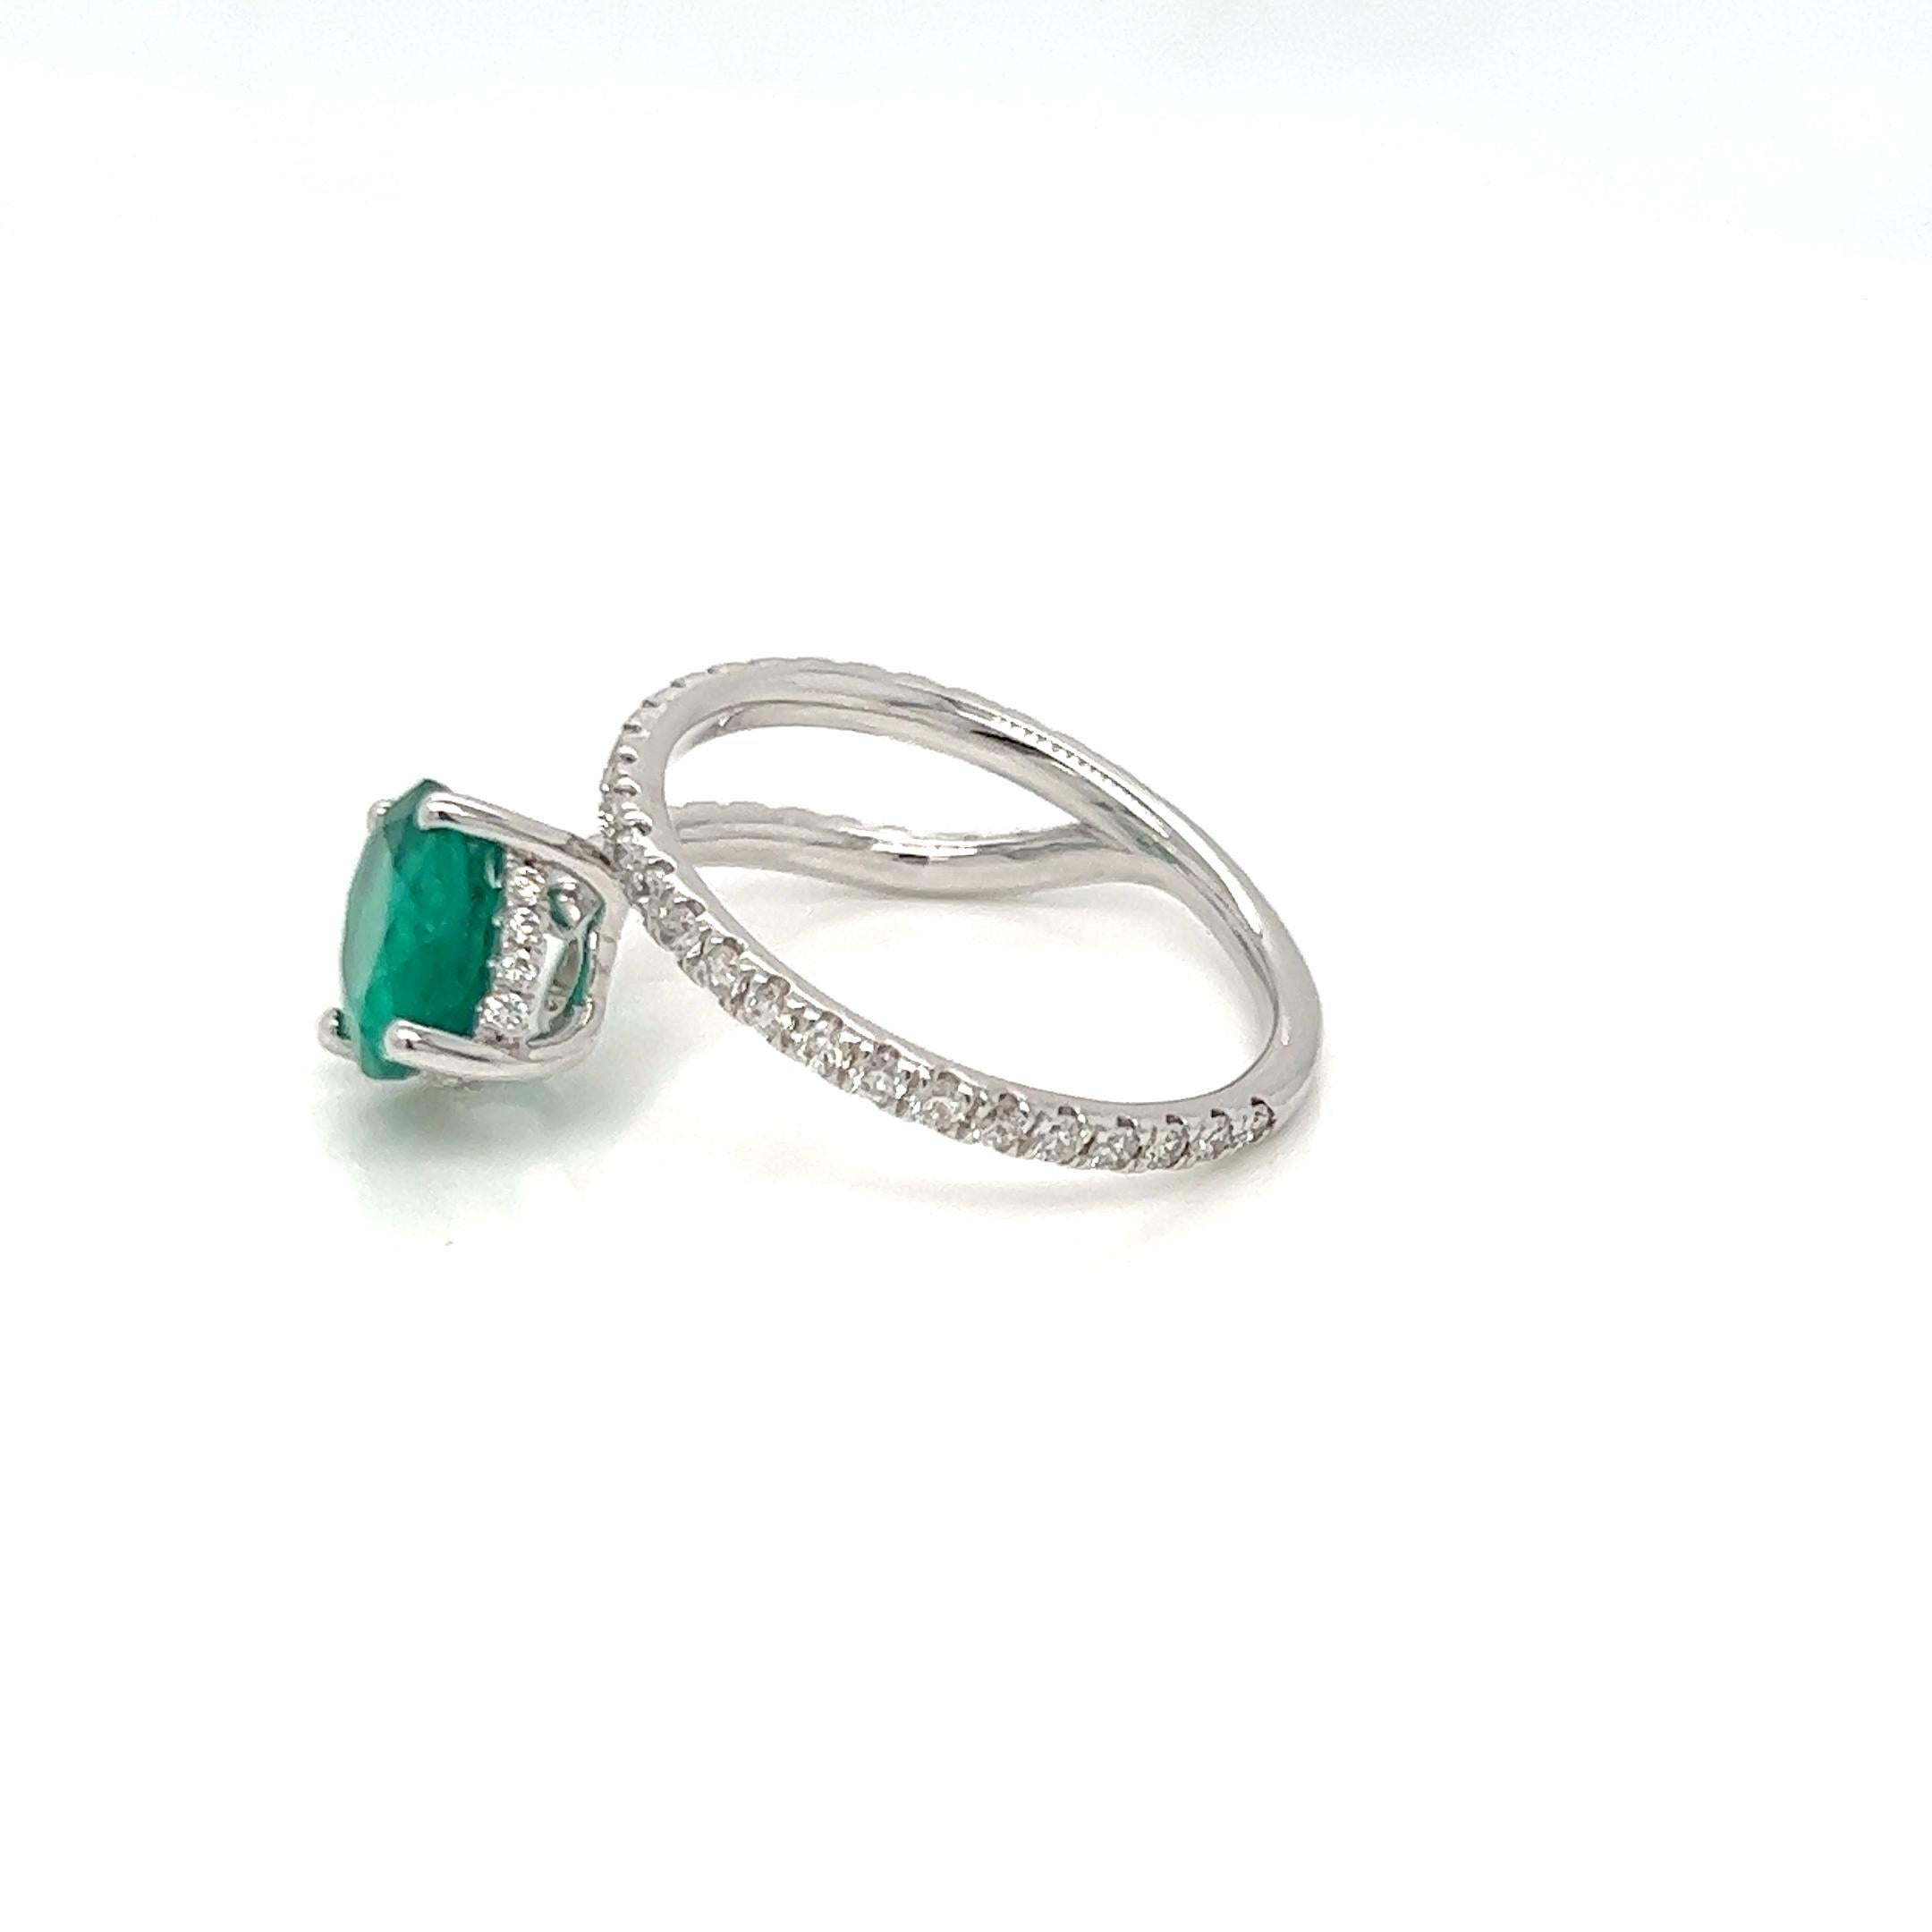 This modernistic ring features a 9x7 oval cut emerald weighing 1.70 carats along with round brilliant cut diamonds weighing 0.65 carats. This ring gives an expensive look but yet trendy feels. The emerald used are from Zambia known for its